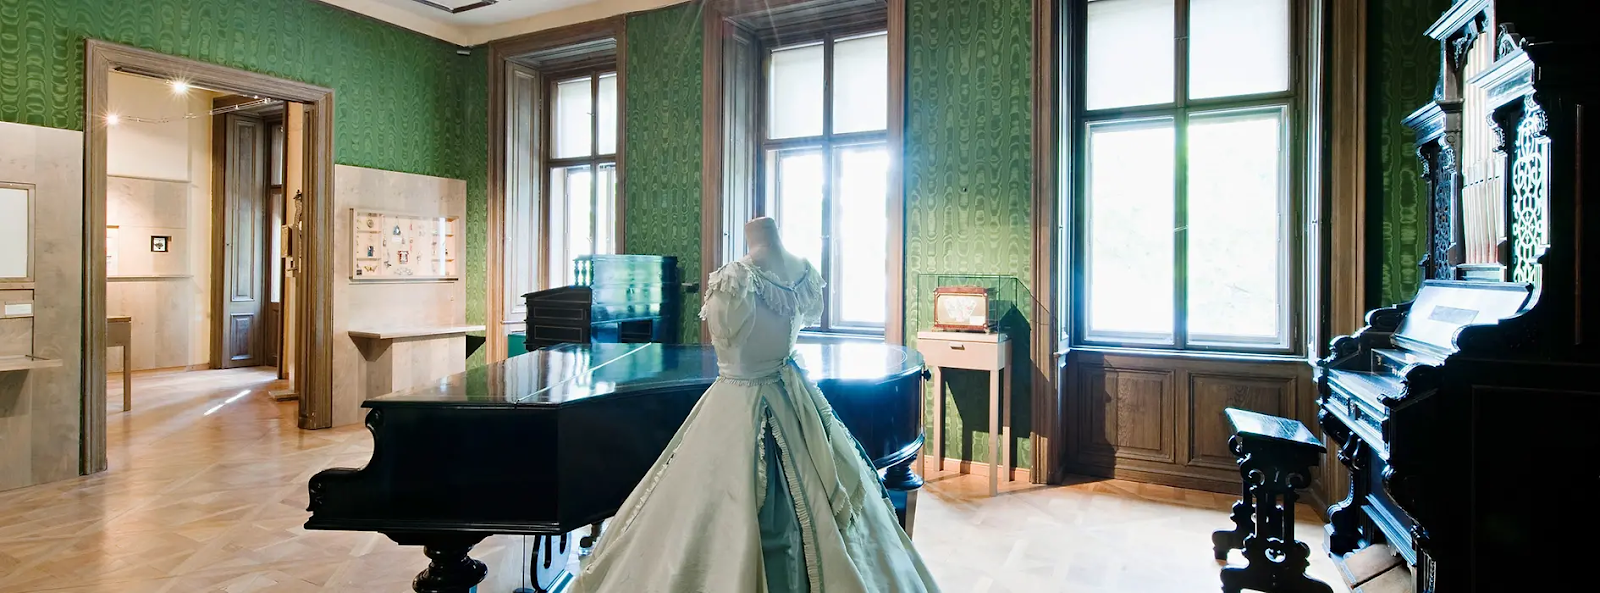 Free apartment of famous composer Johann Strauss.